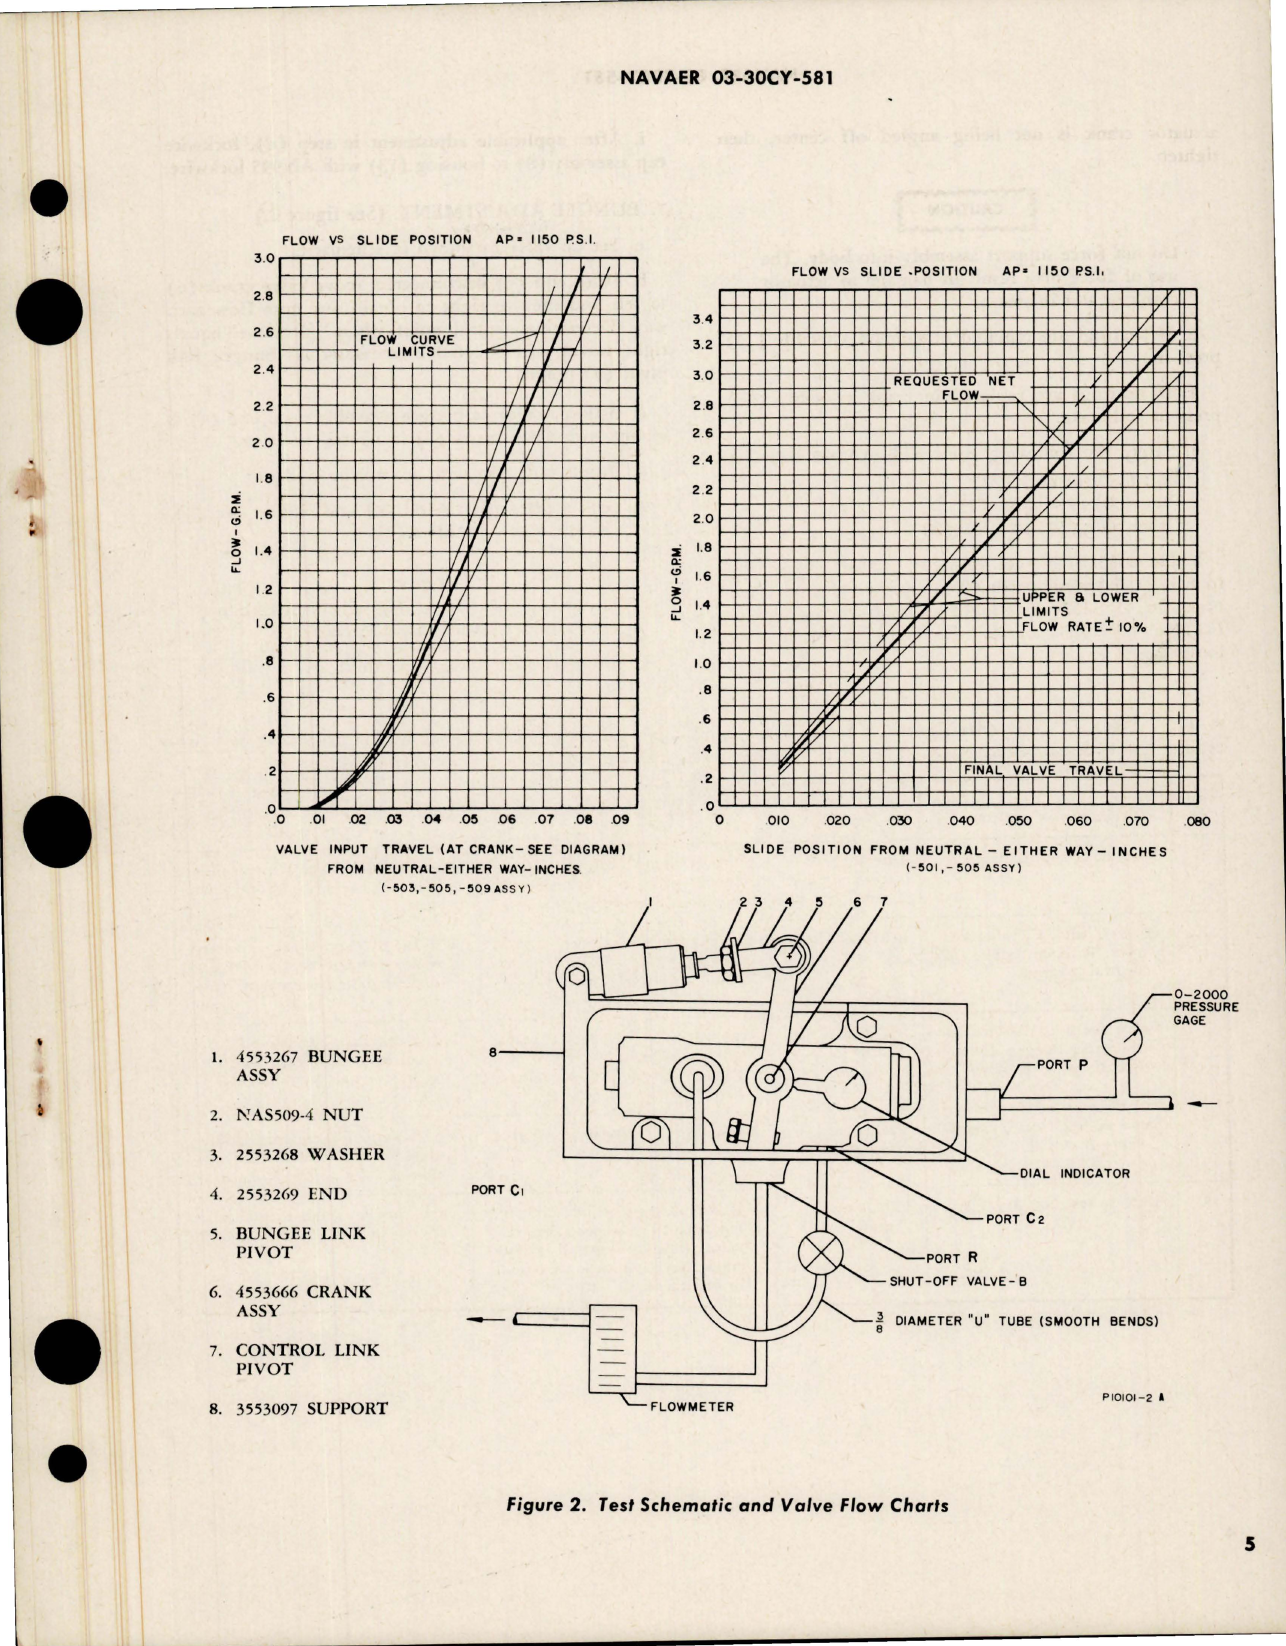 Sample page 5 from AirCorps Library document: Overhaul Instructions with Parts for Elevator Control Boost Valve and Bungee Assembly 